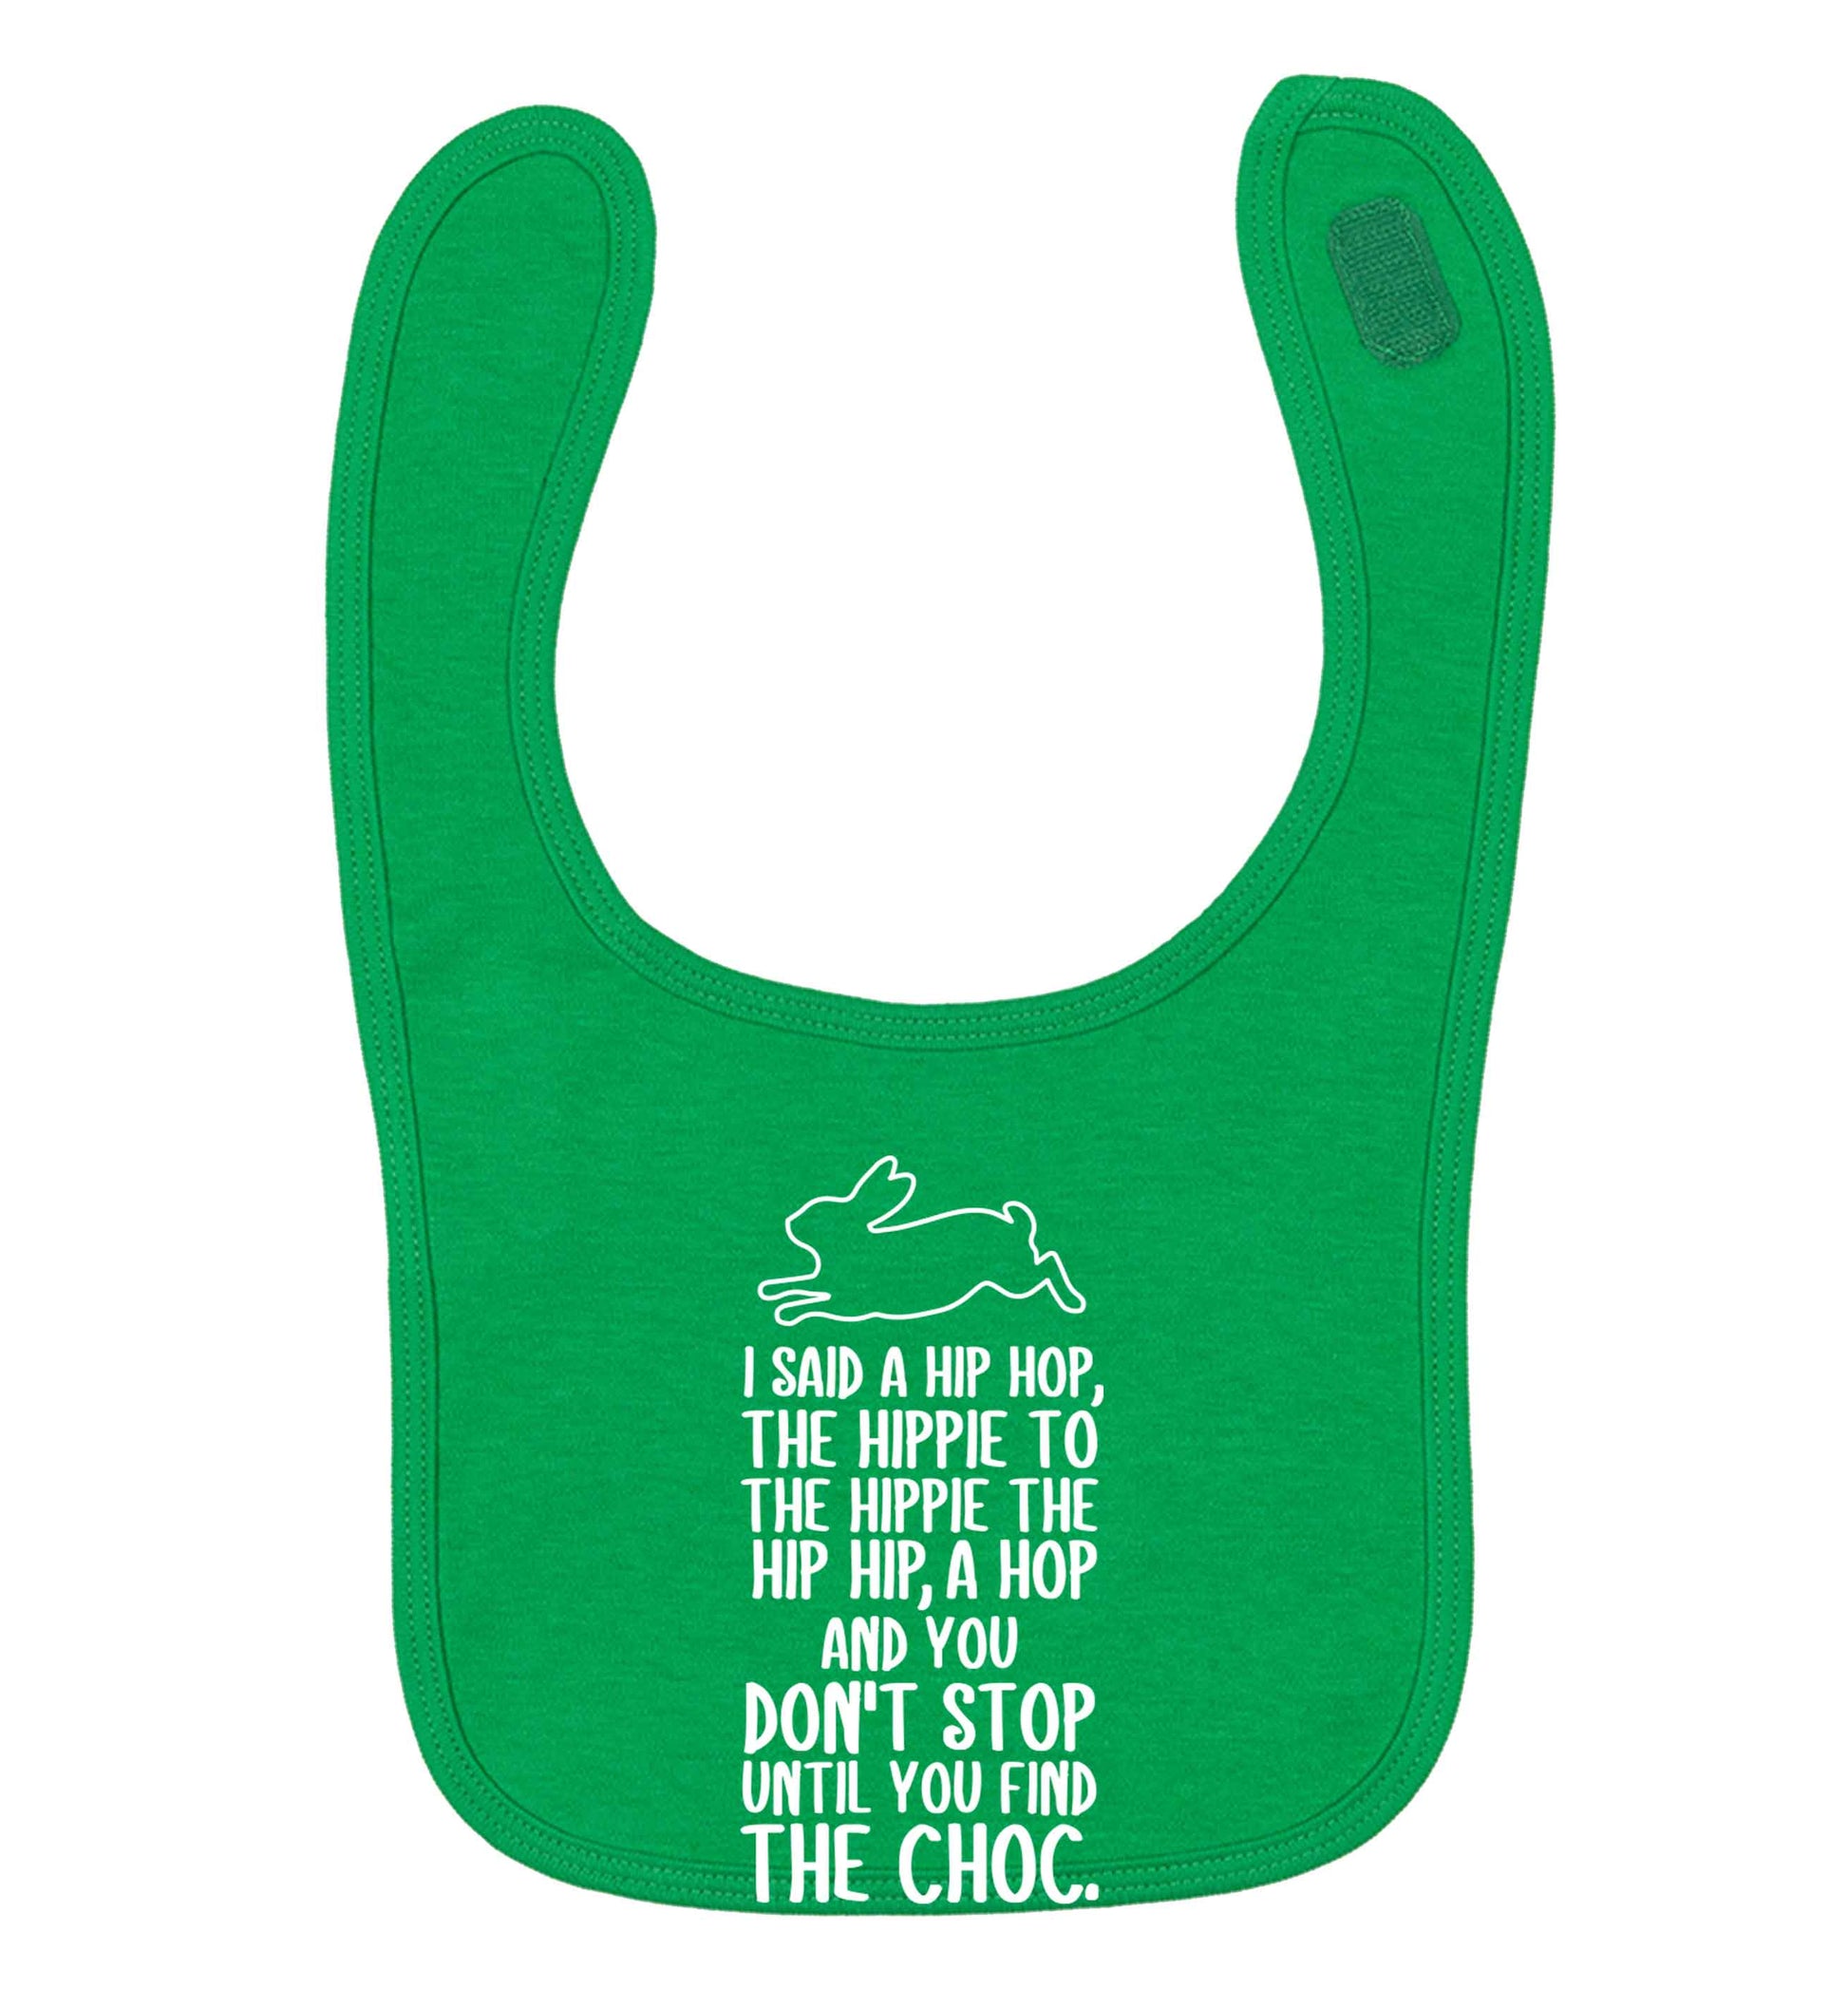 Don't stop until you find the choc green baby bib